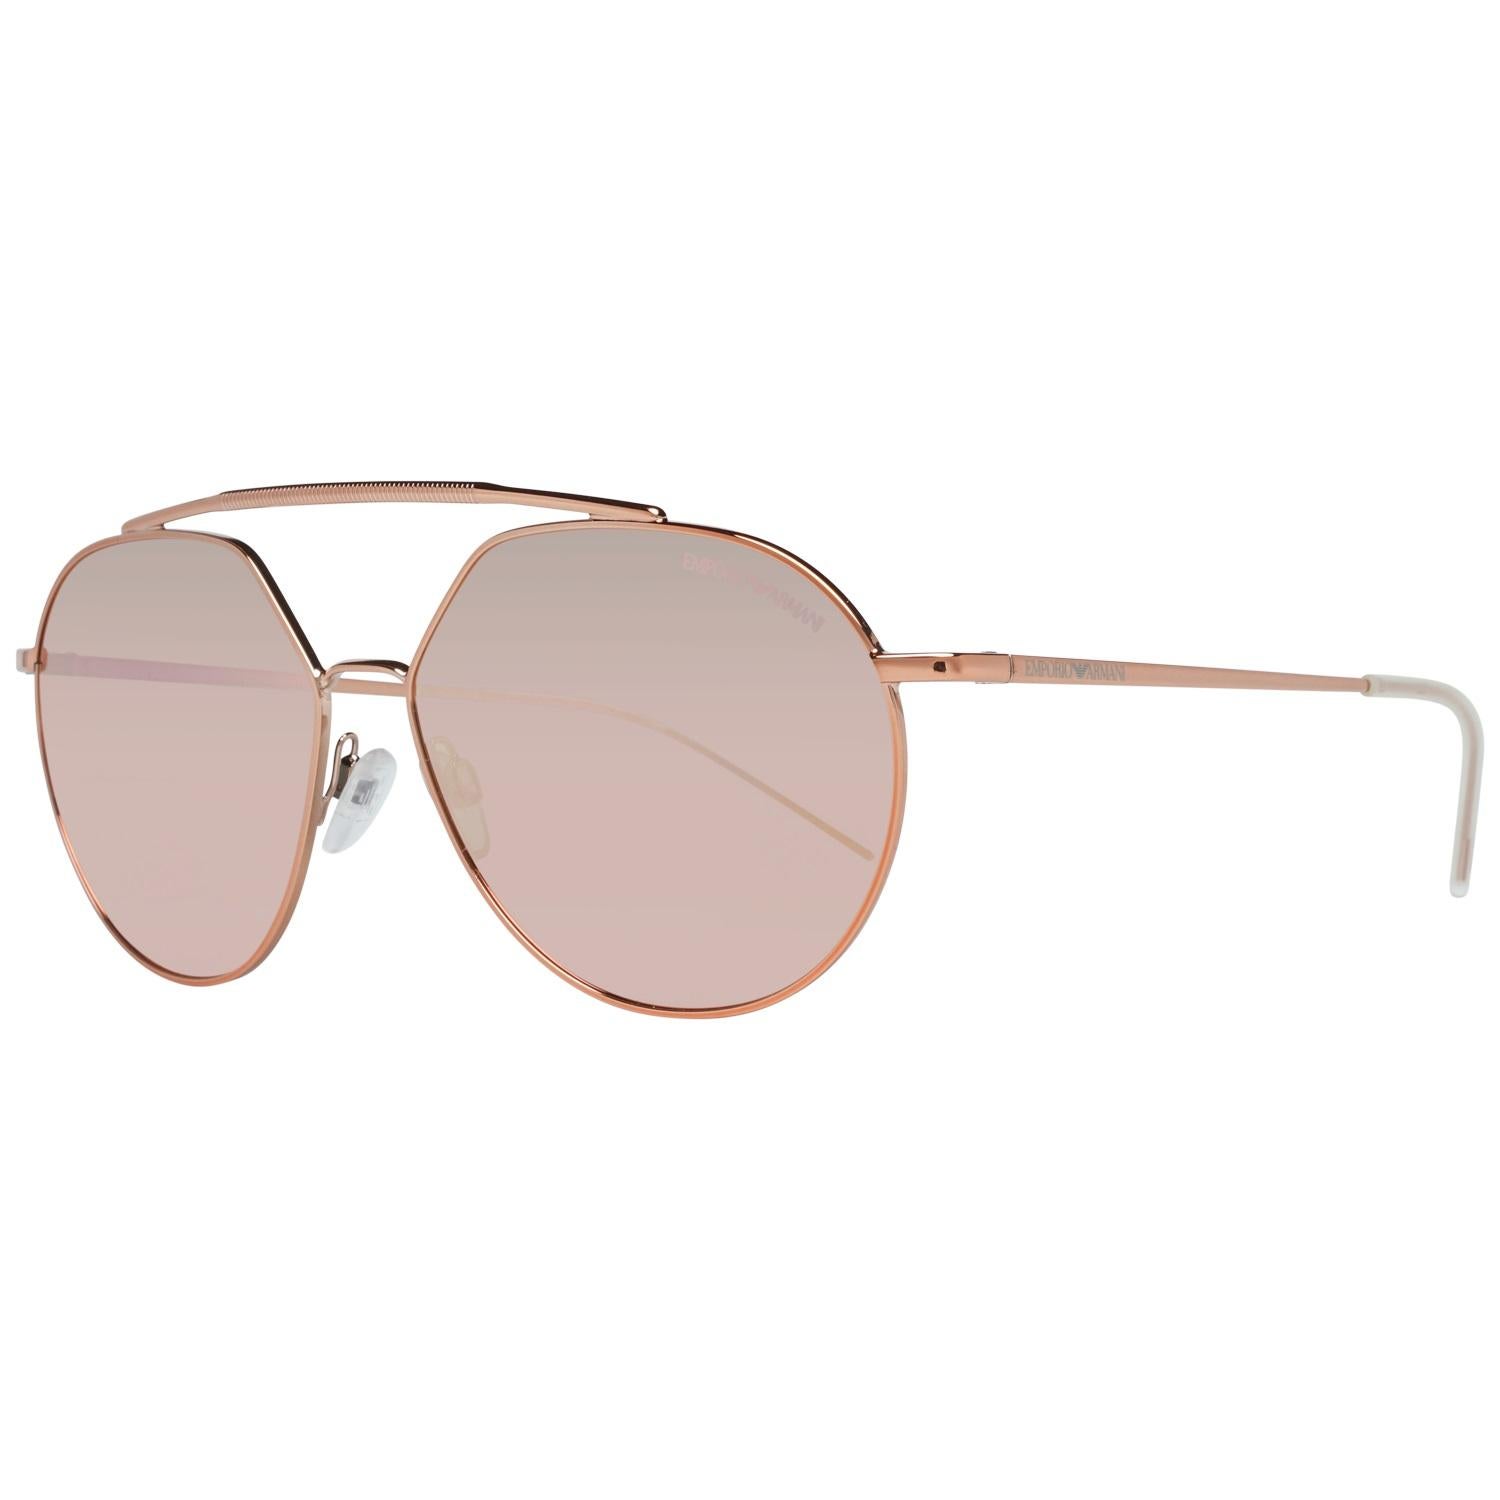 Details

MATERIAL: Metal

COLOR: Gold

MODEL: EA2070 32194Z59

GENDER: Women

COUNTRY OF MANUFACTURE: Italy

TYPE: Sunglasses

ORIGINAL CASE?: Yes

STYLE: Aviator

OCCASION: Casual

FEATURES: Lightweight

LENS COLOR: Multicolor

LENS TECHNOLOGY: